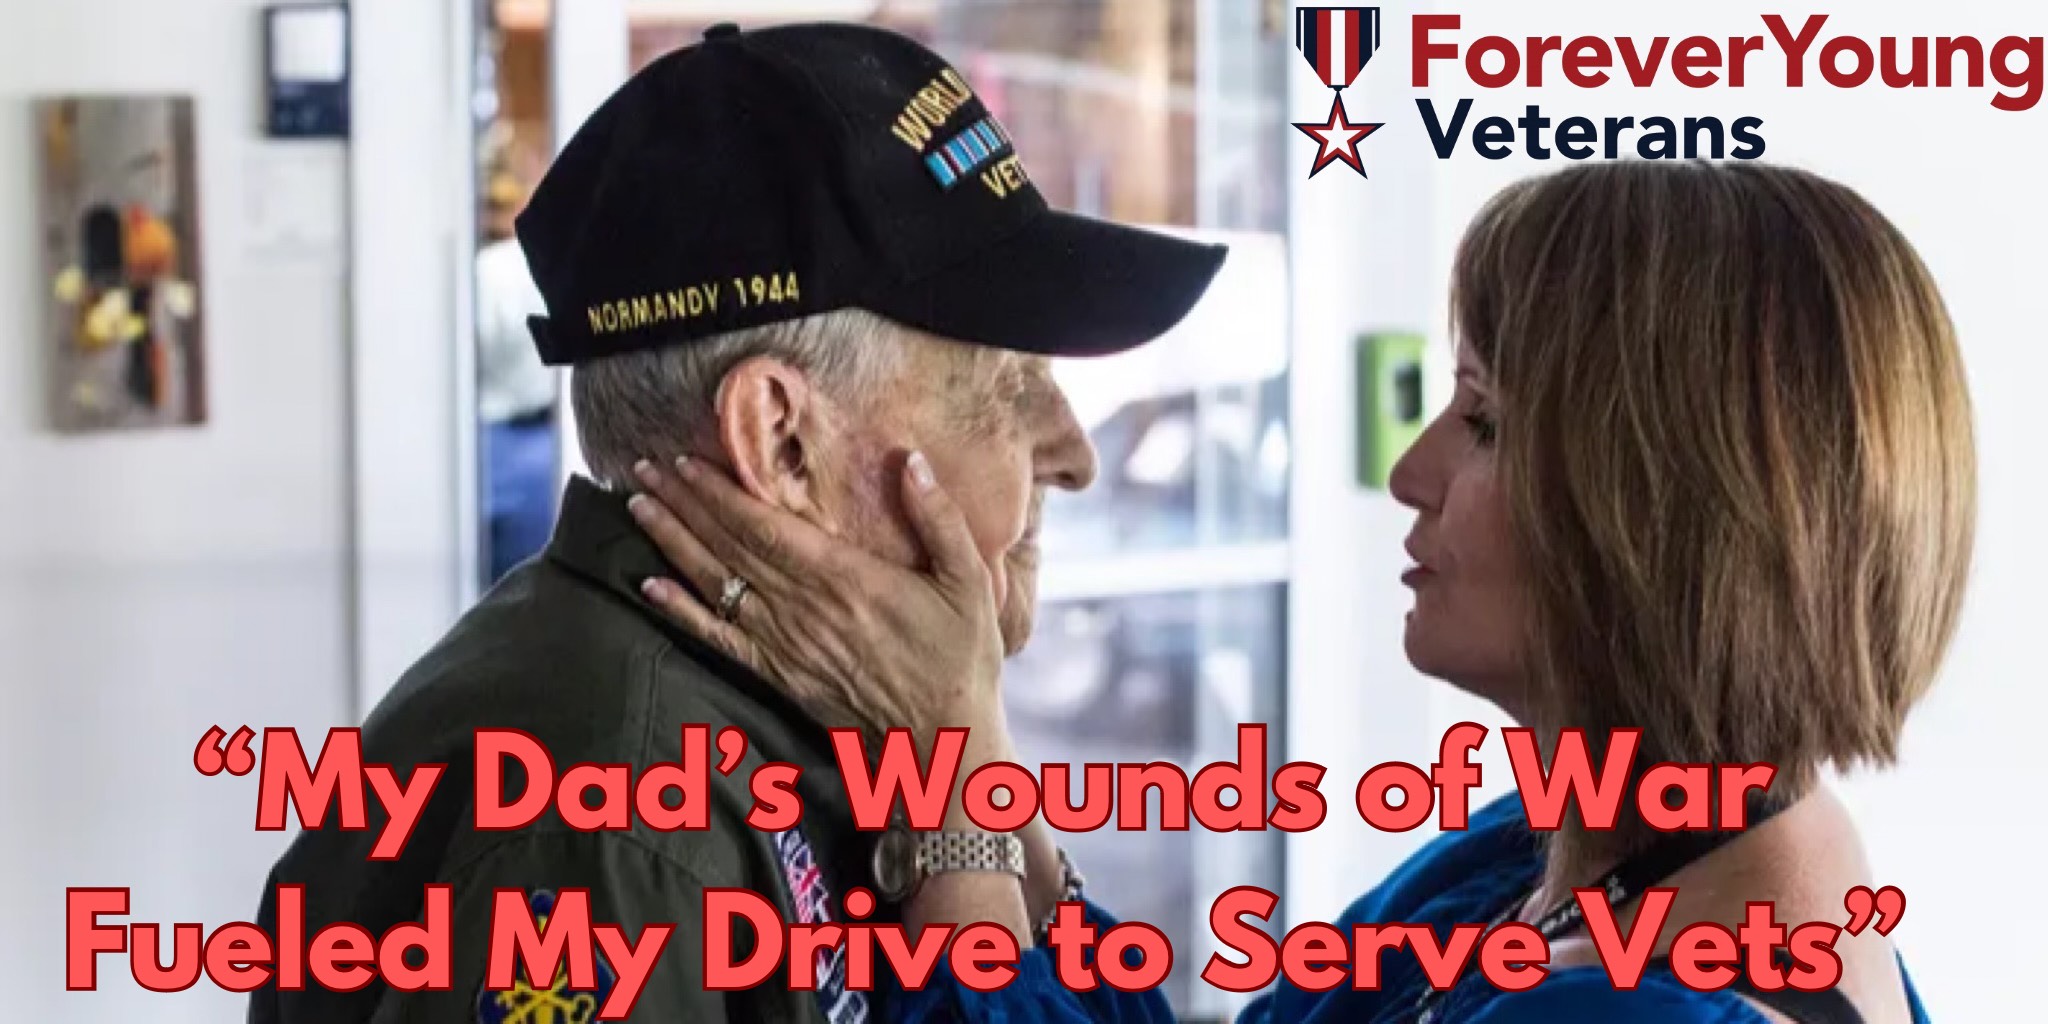 How My Dad's Wounds of War Fueled My Drive to Serve Vets